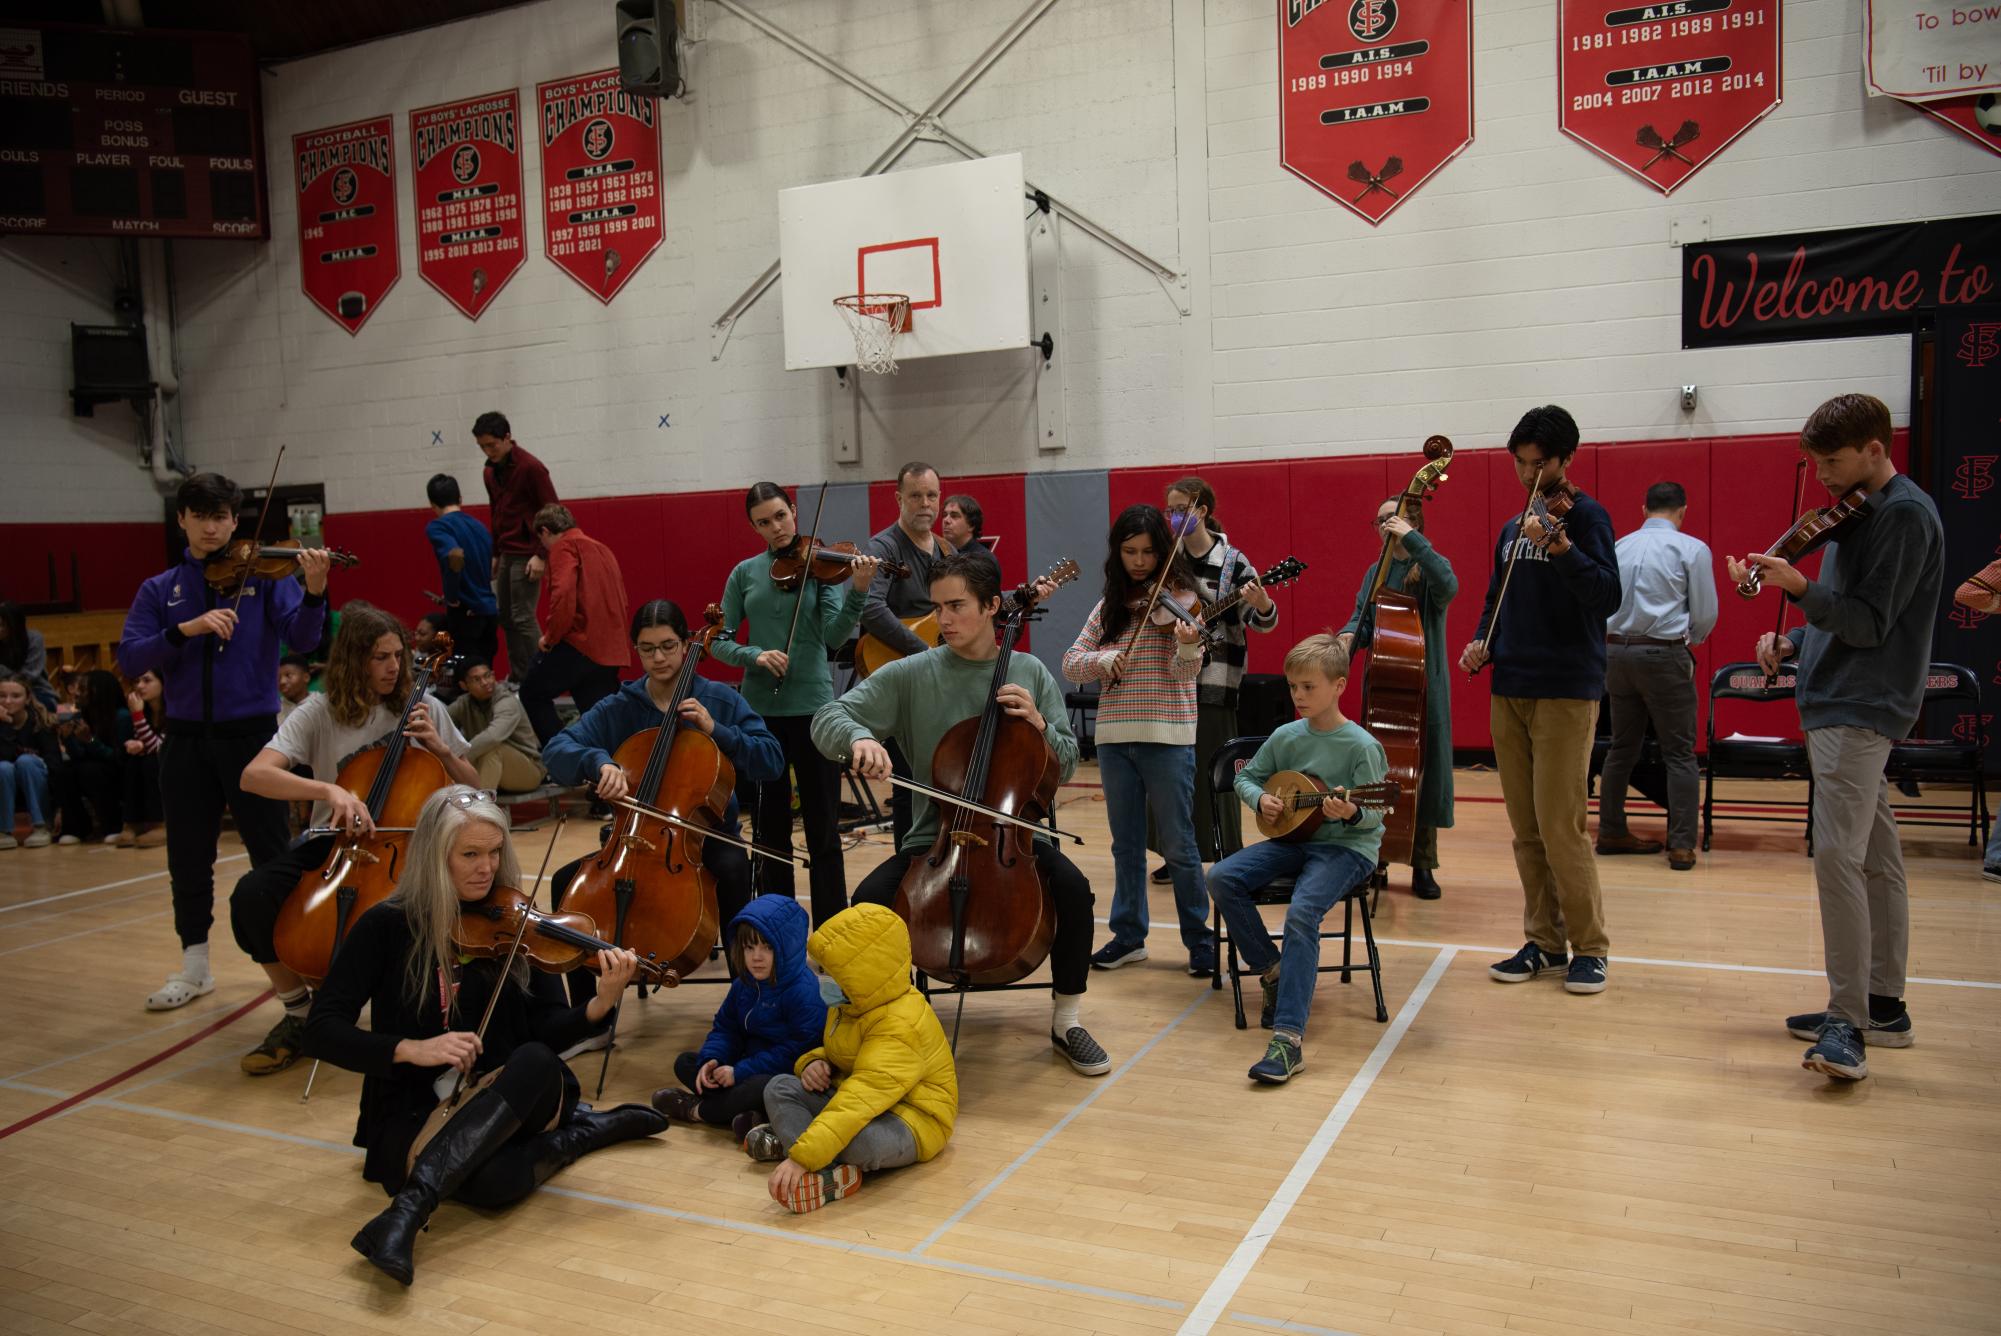 Students and teachers in Friends Schools Fiddle Club performed as community members of all ages filled the Old Gym for the annual Thanksgiving Convocation.